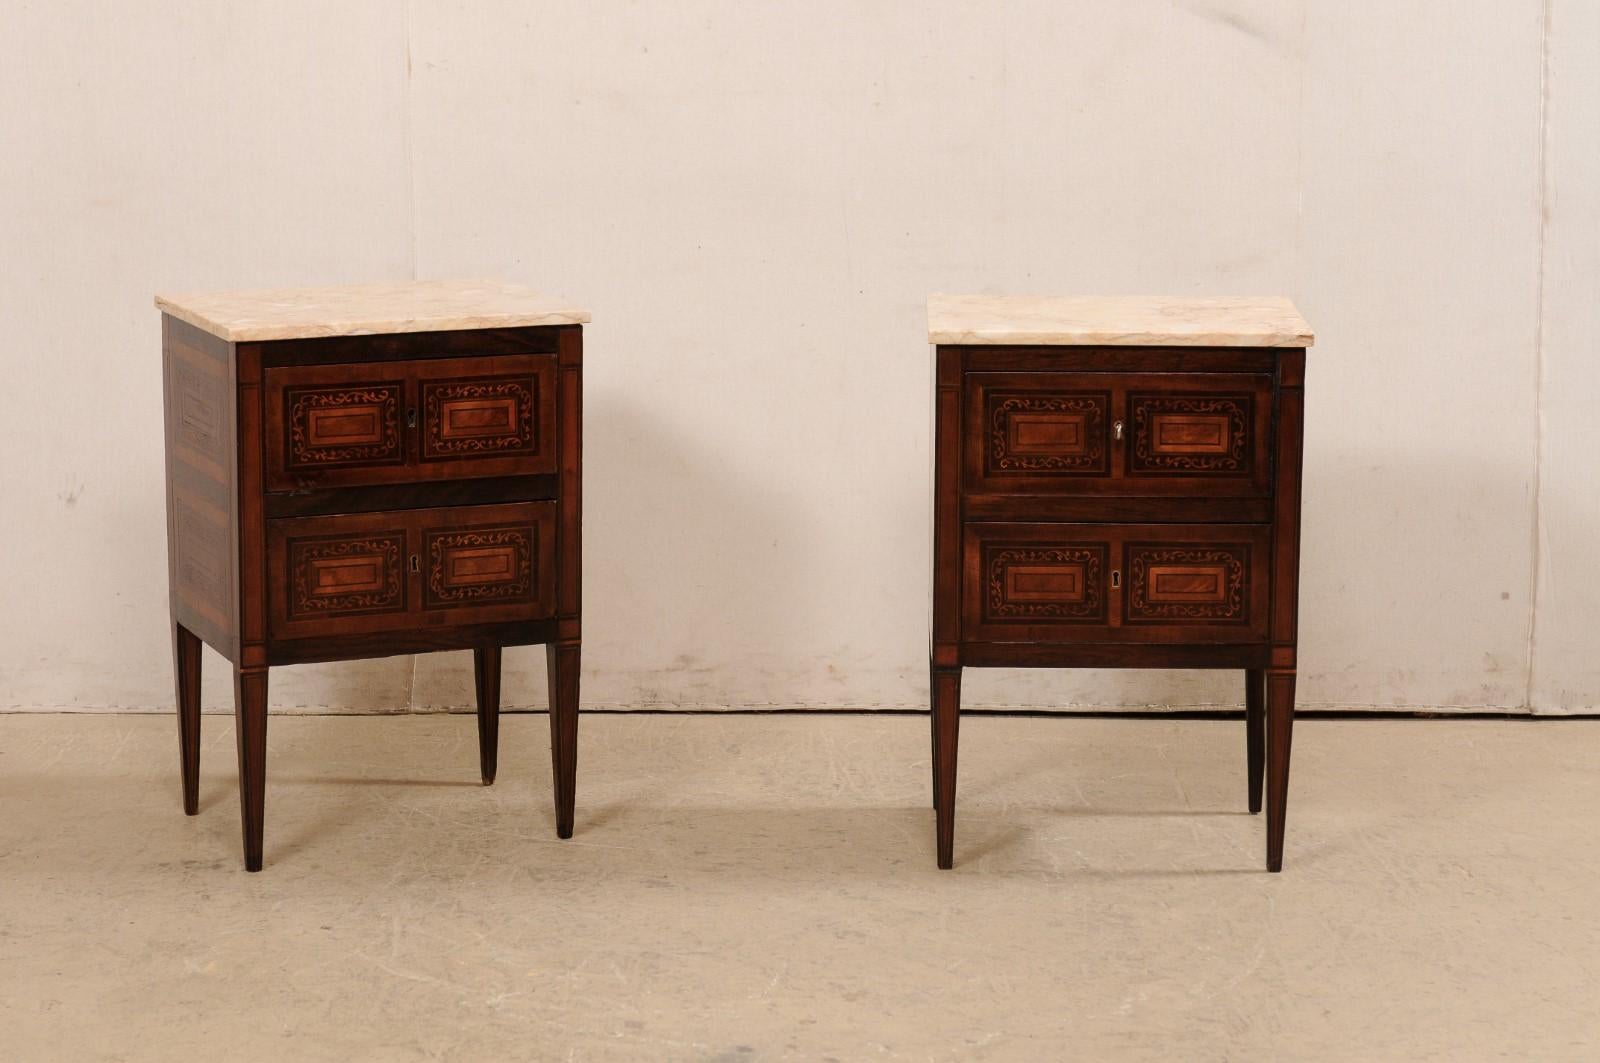 A pair of Italian small sized comodini with marquetry and marble tops, from the early 20th century. This antique pair of side chests from Italy each feature a marble top over wooden case which houses a pair of drawers, and presented on squared legs